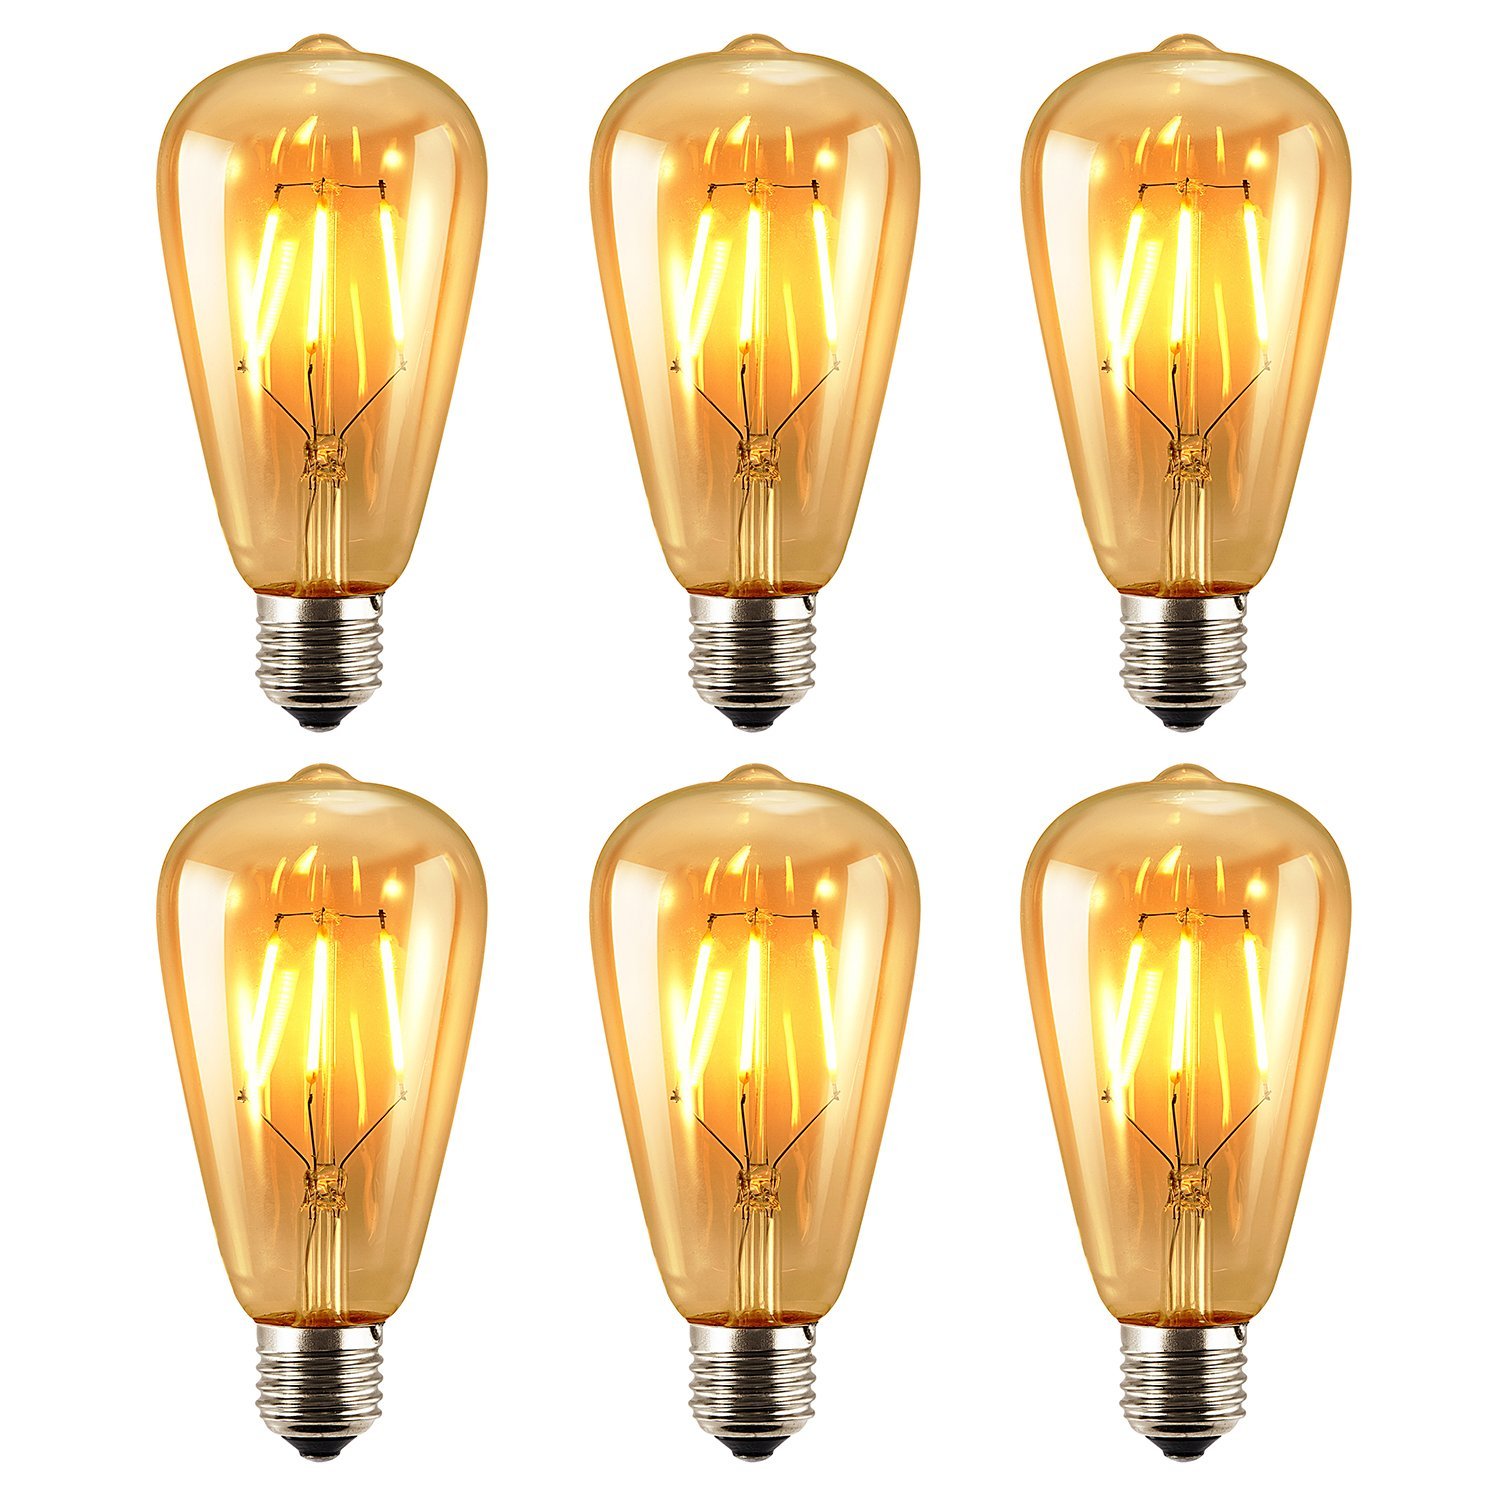 Vintage Edison Dimmable LED Warm White Light Bulbs – Pack of 6 – Just $19.99!